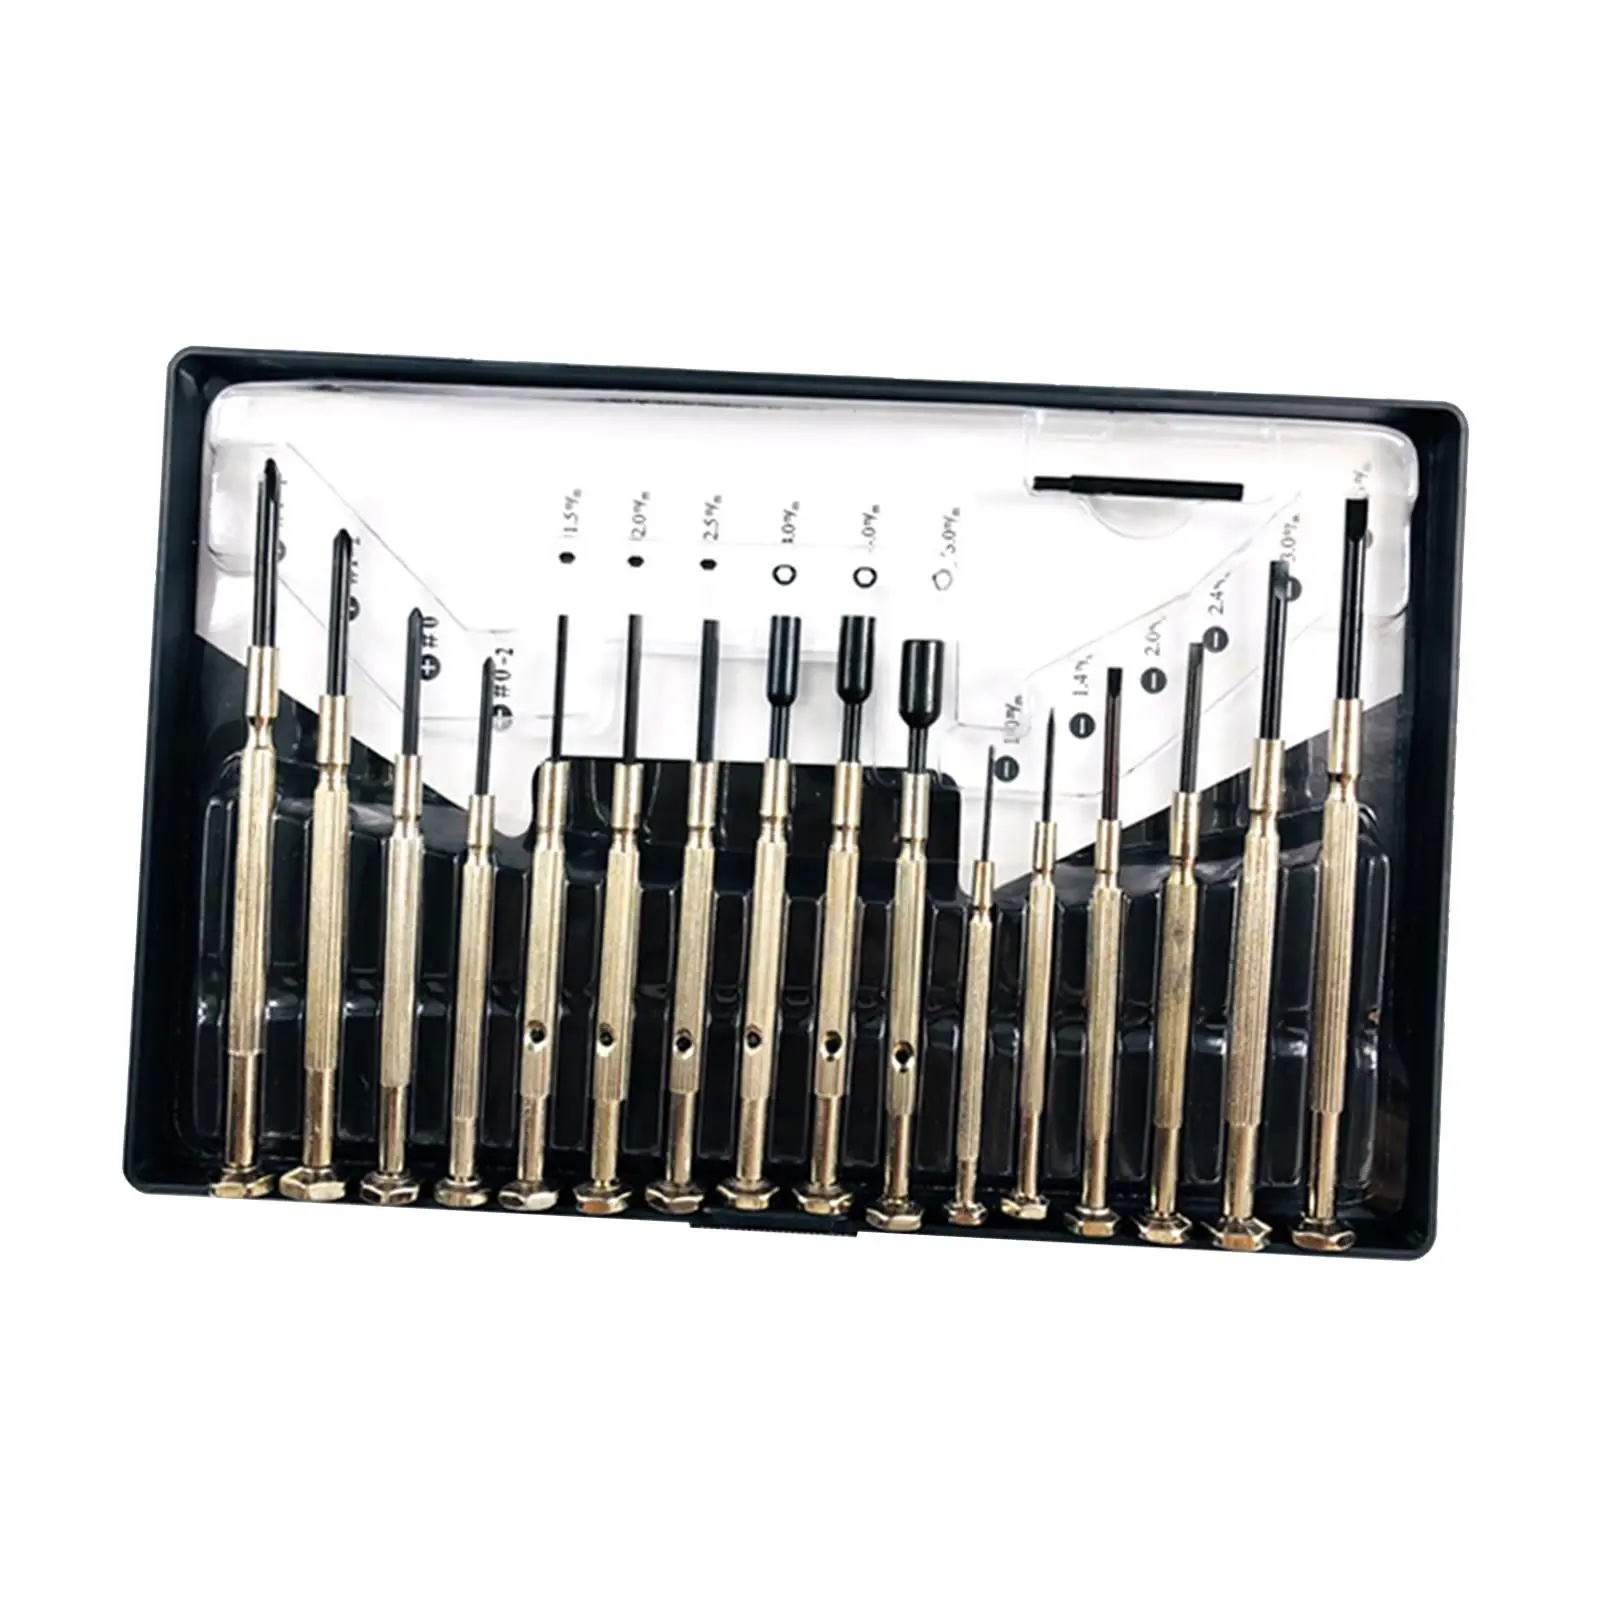 16x Pocket Precision Screwdriver Set Hand Tools Nutdriver Watch Screwdriver for Watches Game Console Eyeglasses Laptop Camera